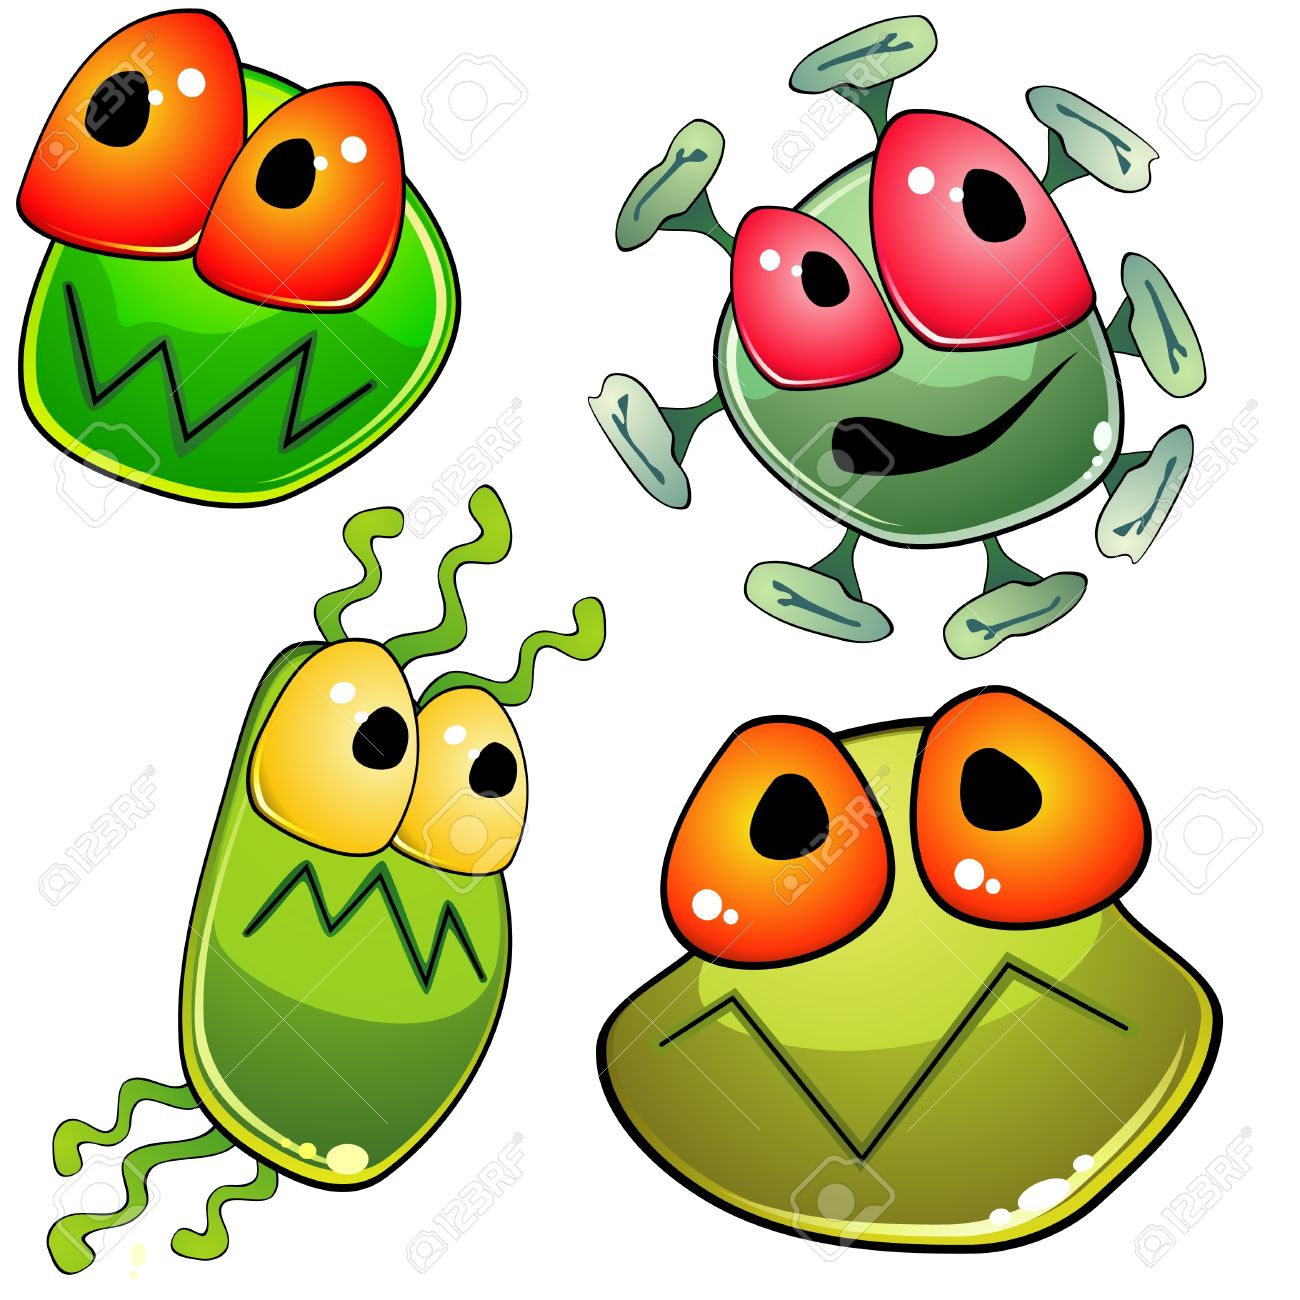 Microorganism Clipart   Clipart Panda   Free Clipart Images